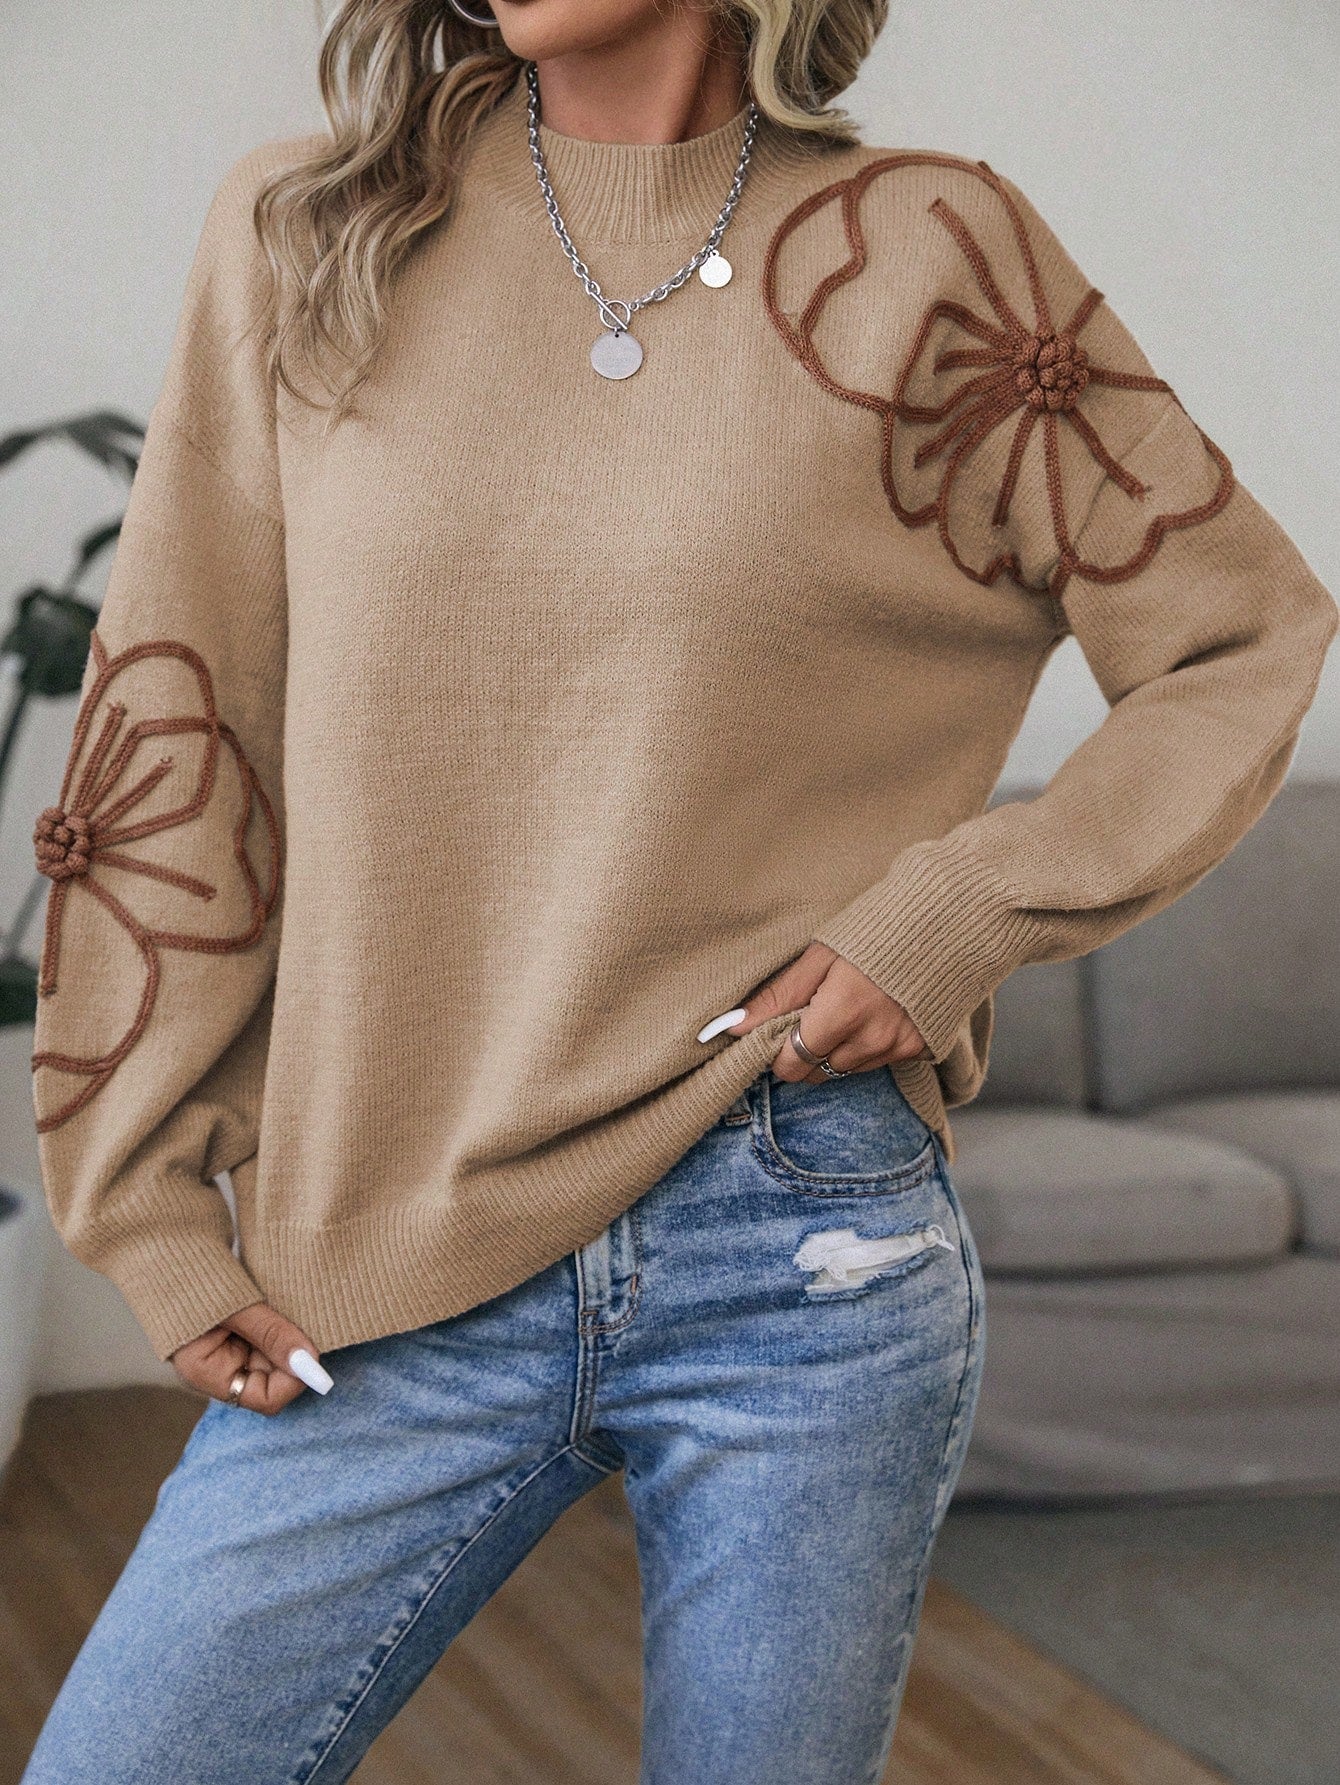 Floral Babe Sweater